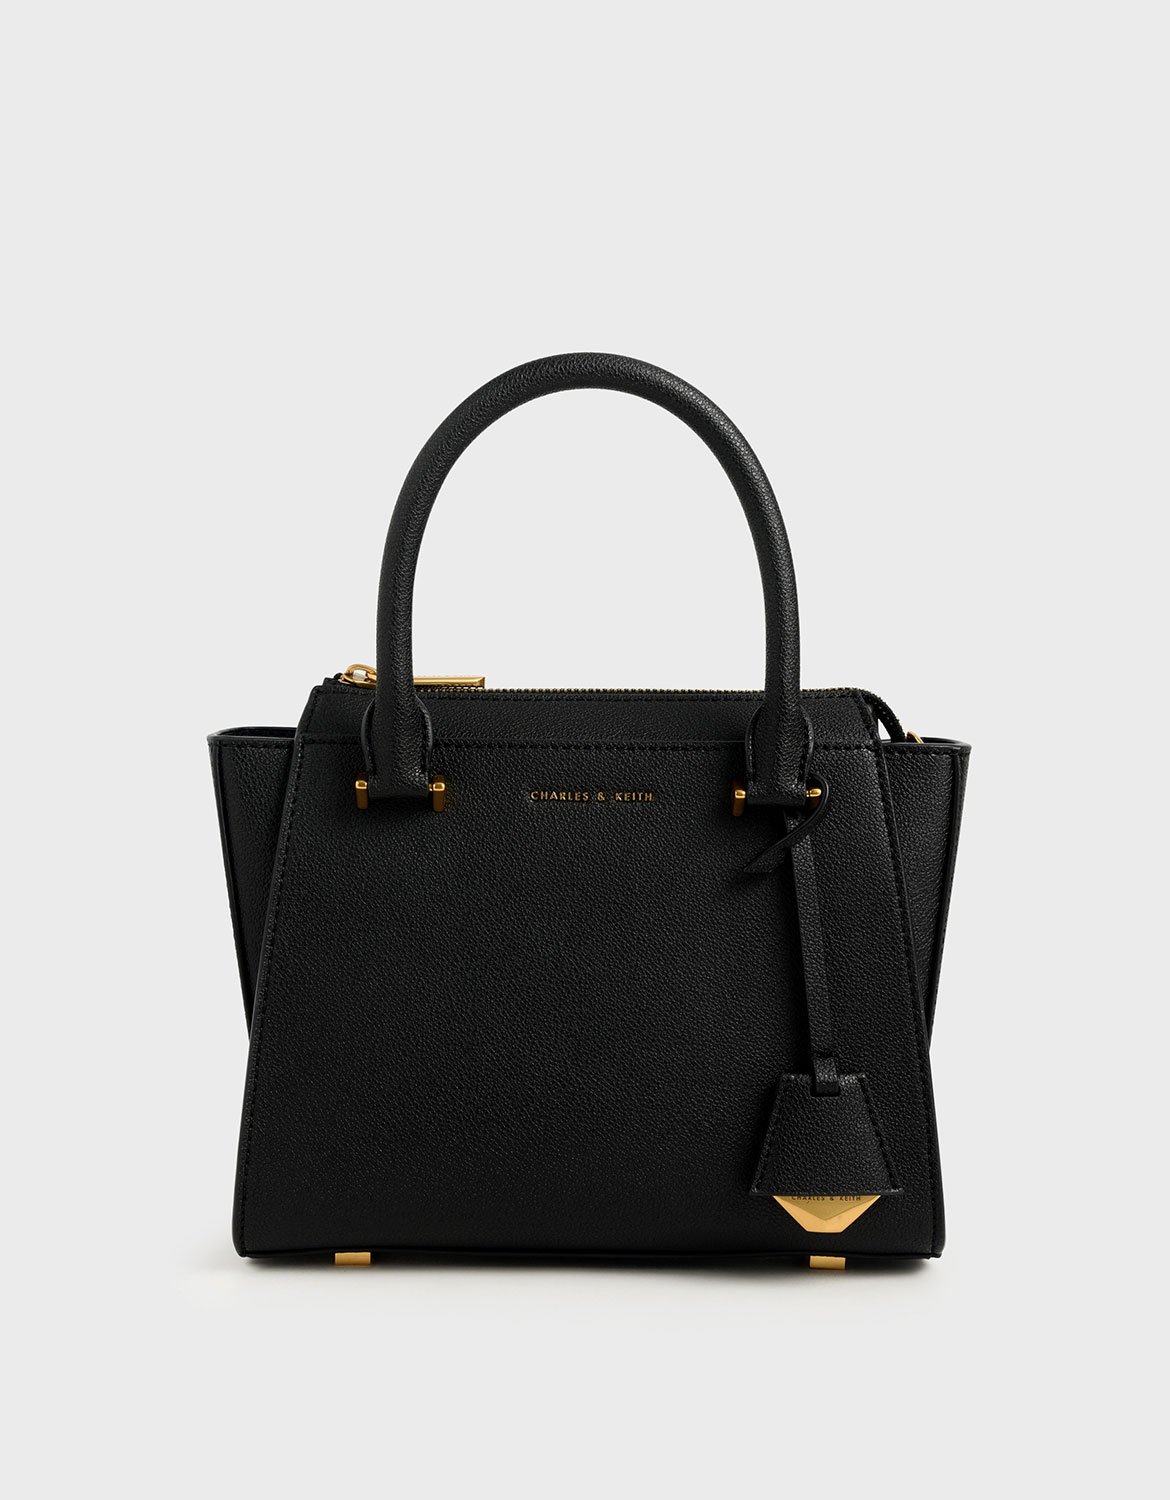 Black Structured Trapeze Bag  CHARLES  KEITH  US